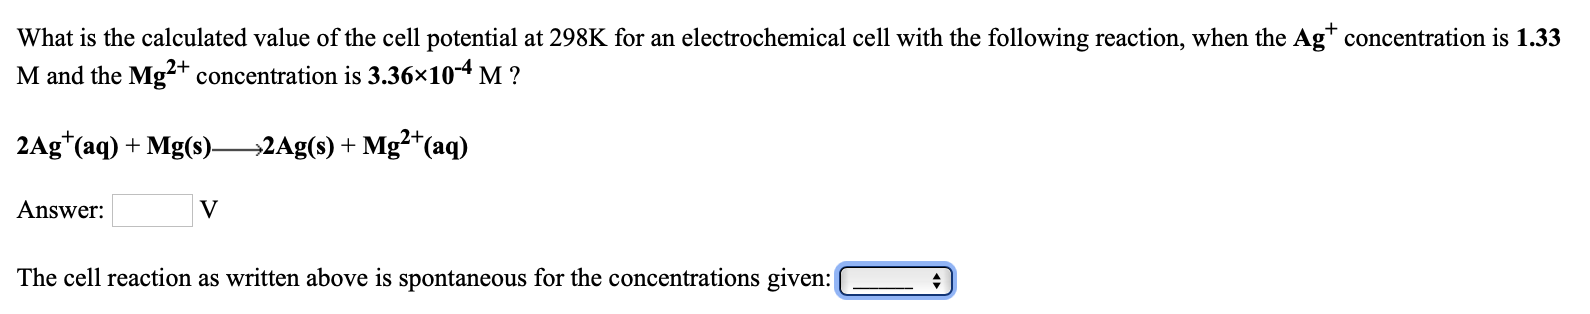 What is the calculated value of the cell potential at 298K for an electrochemical cell with the following reaction, when the Ag* concentration is 1.33
M and the Mg?+ concentration is 3.36×10-4 M ?
2Ag*(aq) + Mg(s)2Ag(s) + Mg*(aq)
Answer:
The cell reaction as written above is spontaneous for the concentrations given:
